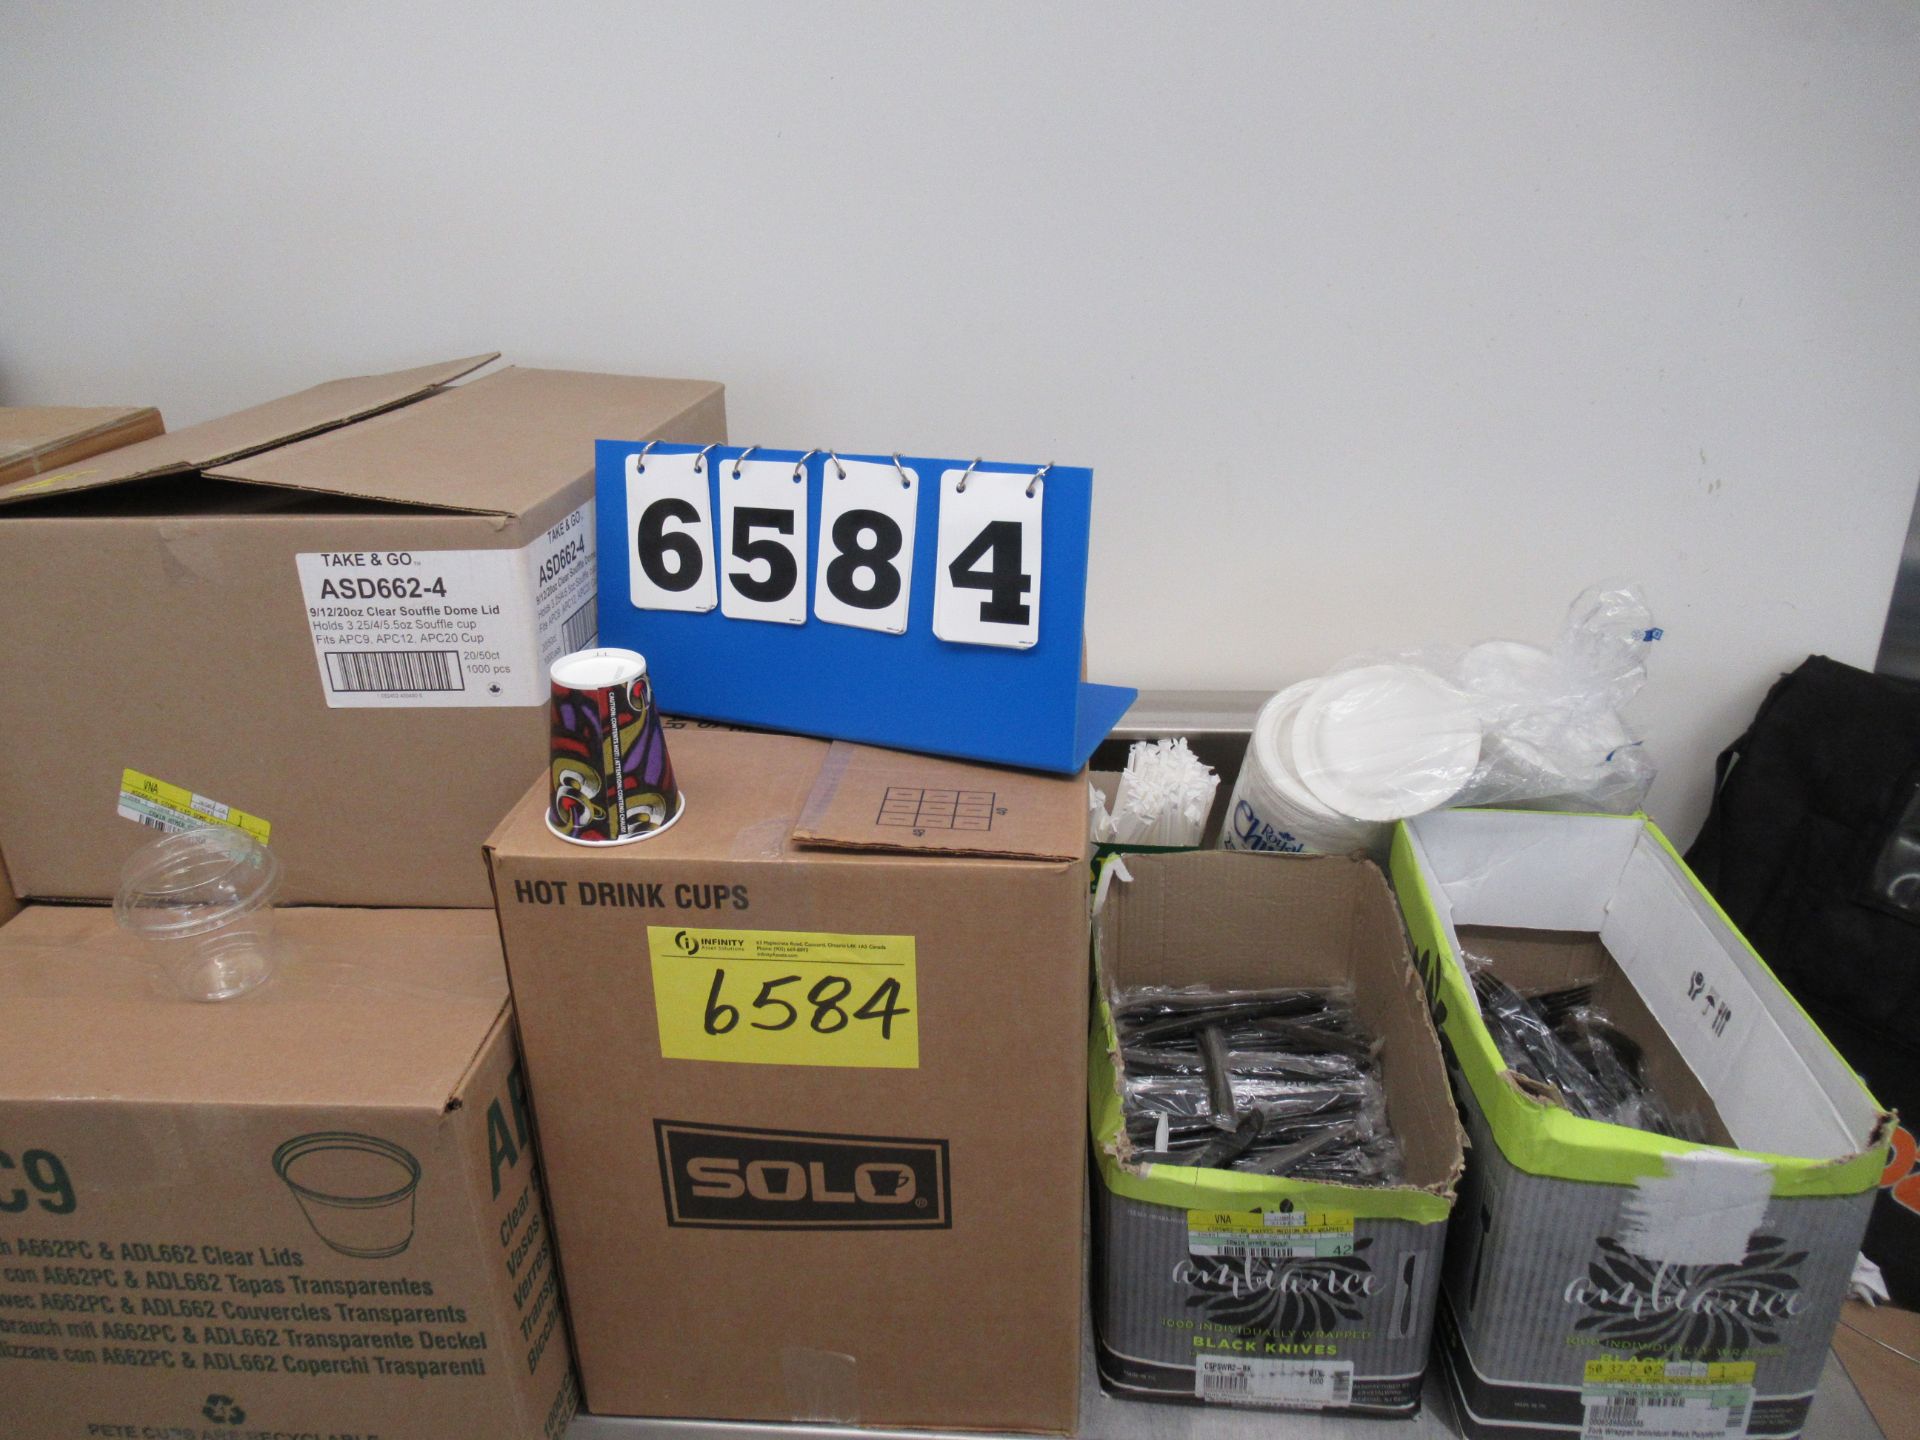 LOT OF ASSORTED TAKE OUT CONTAINERS (PIZZA BOXES, CHAFFING FUEL, GLOVES, WASTE BAGS, ETC) (REUTER) - Image 4 of 4